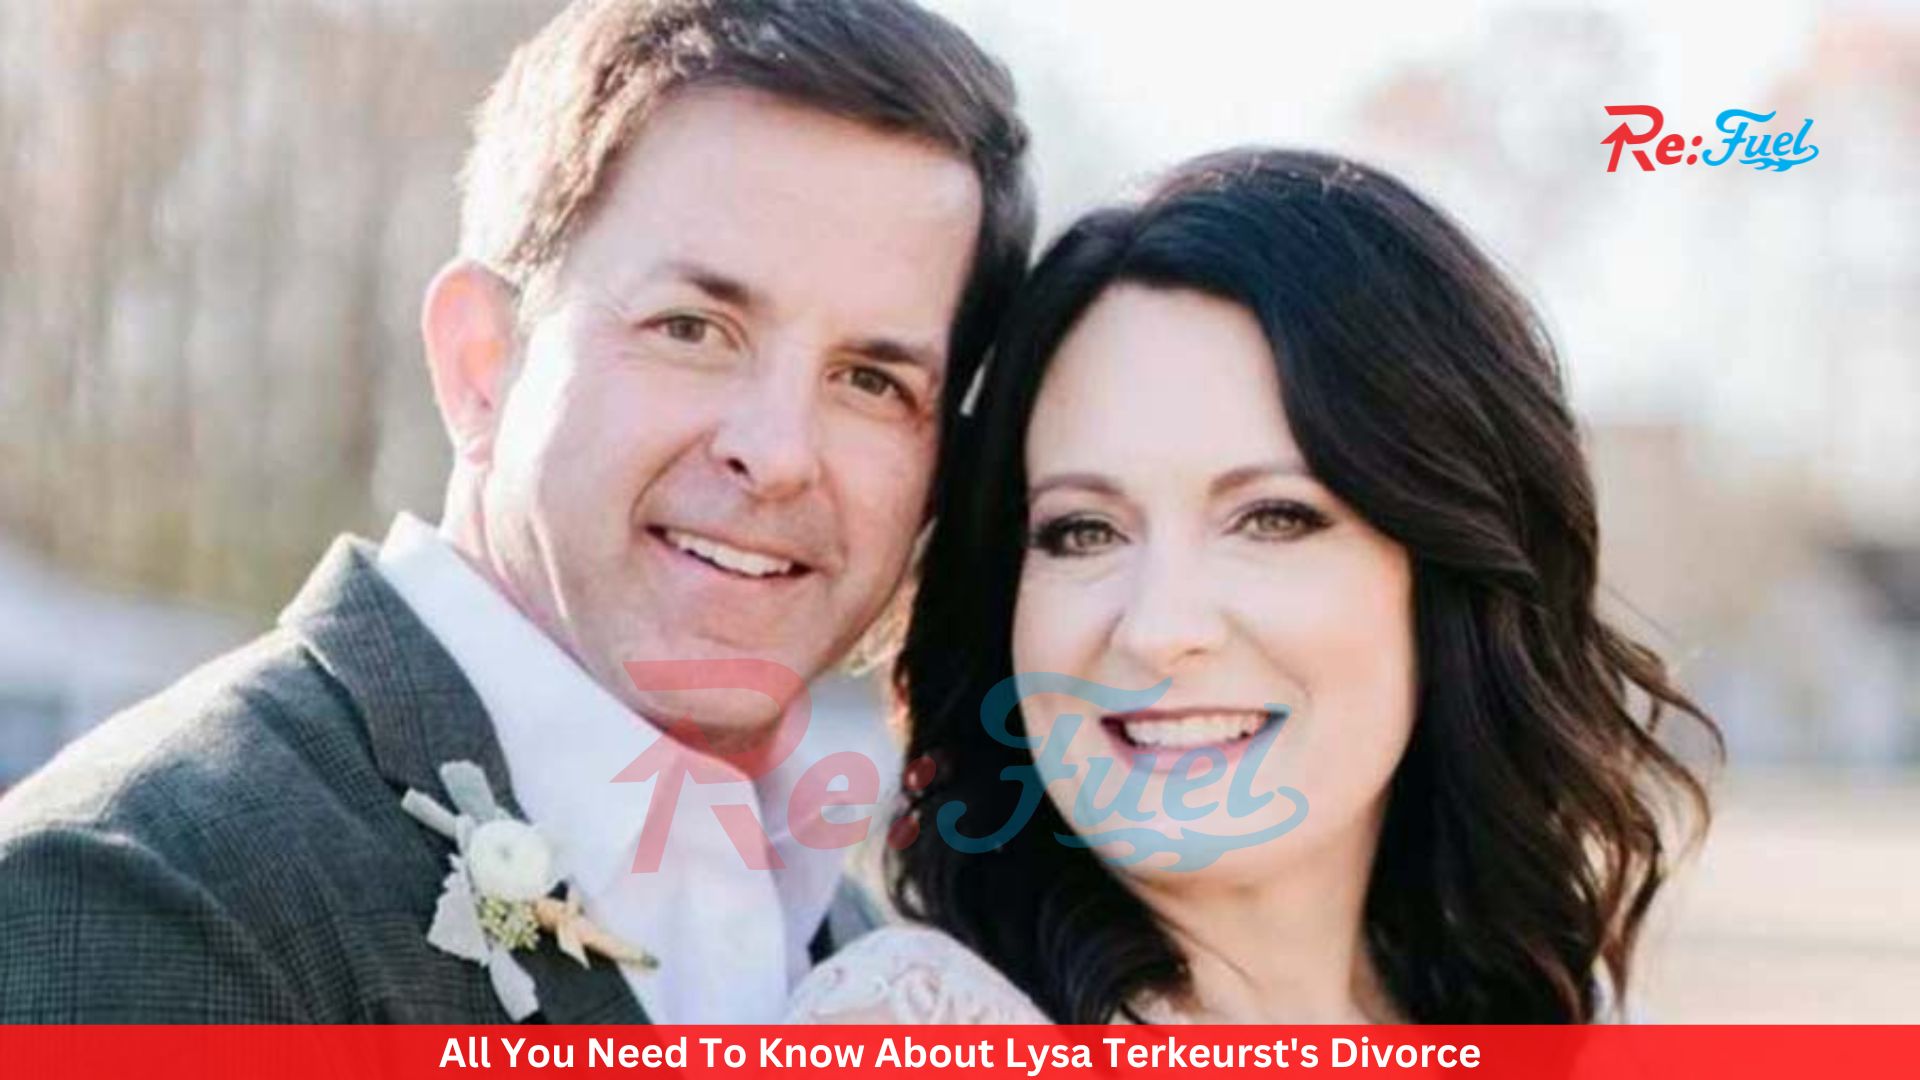 All You Need To Know About Lysa Terkeurst's Divorce